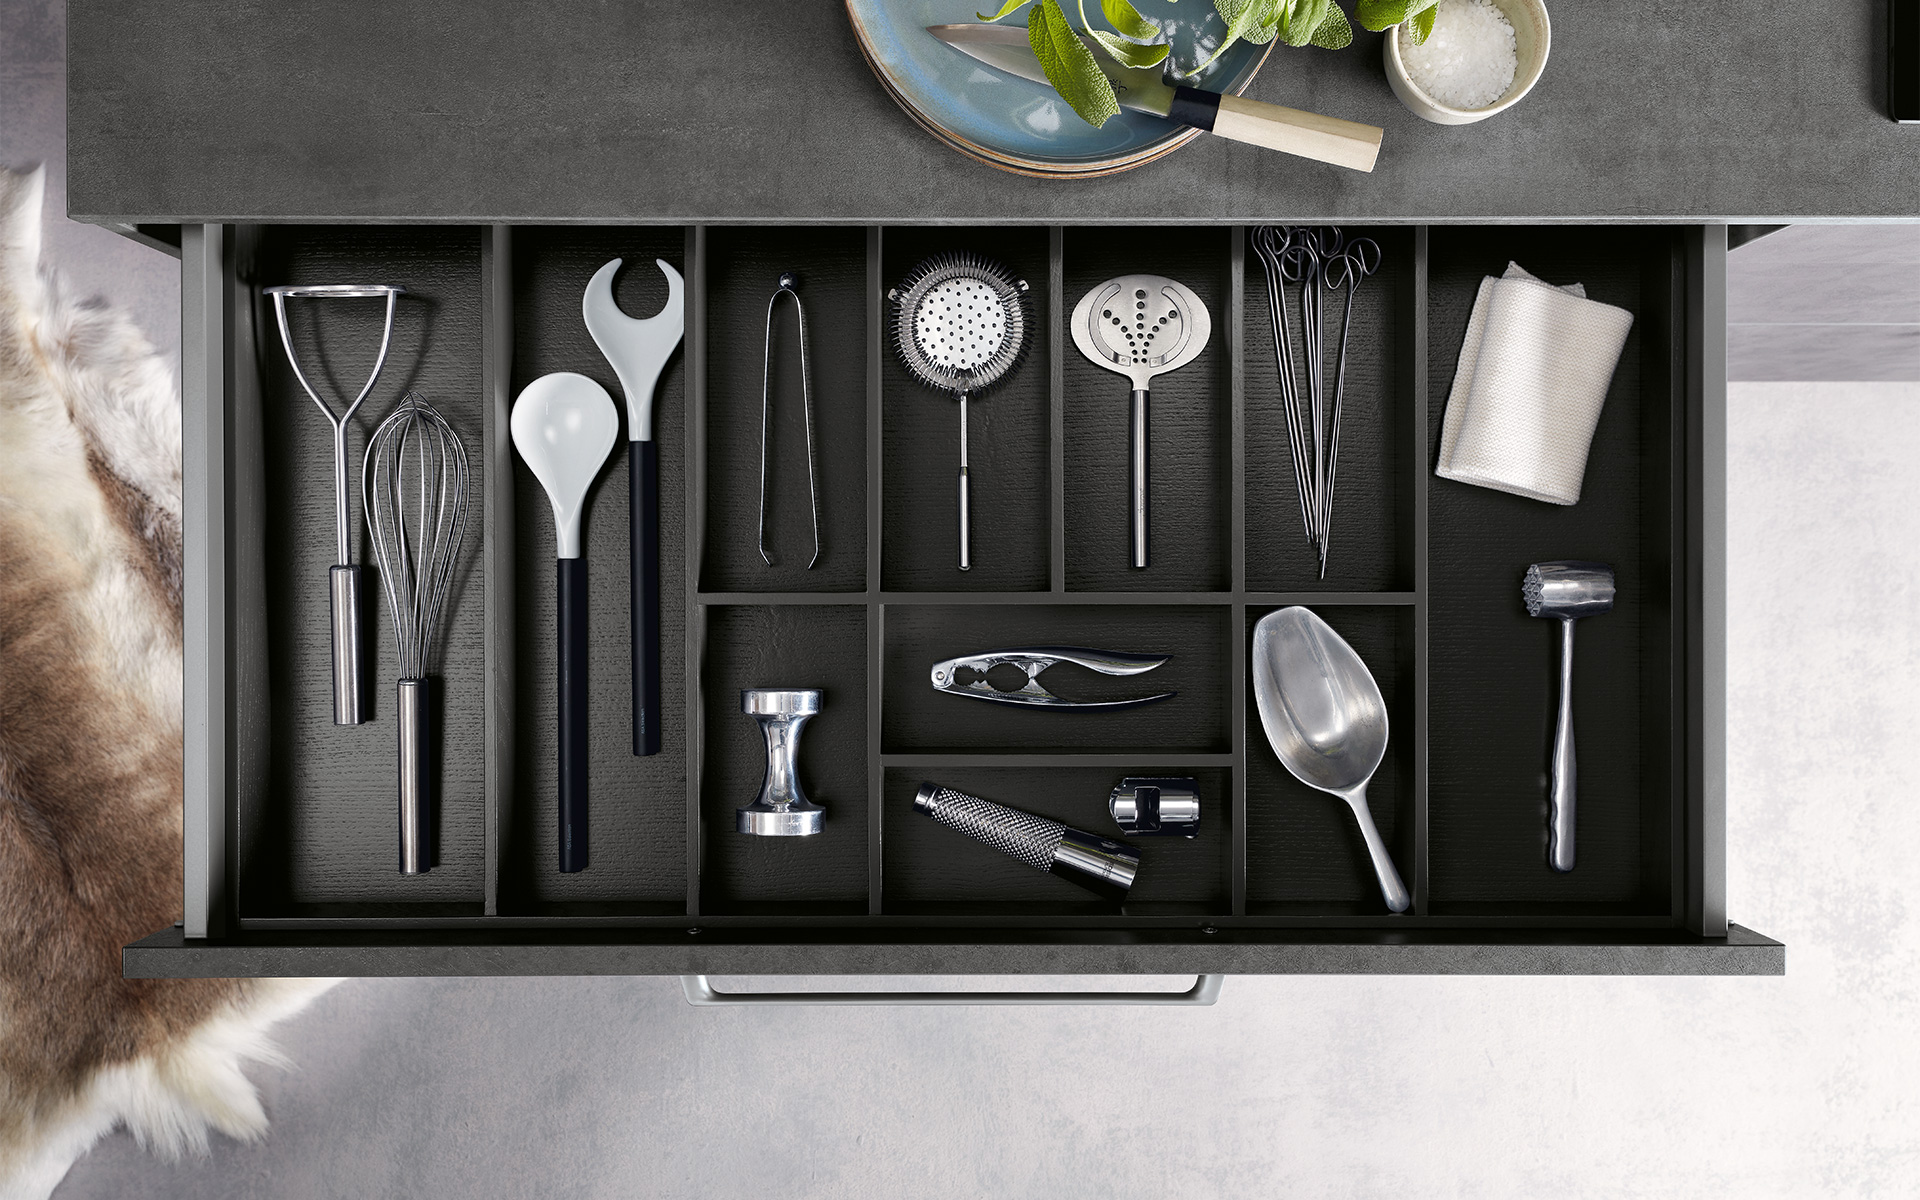 Interior organisation from Häcker for Your organisation spatial kitchen kitchen. becomes your new with smart a miracle